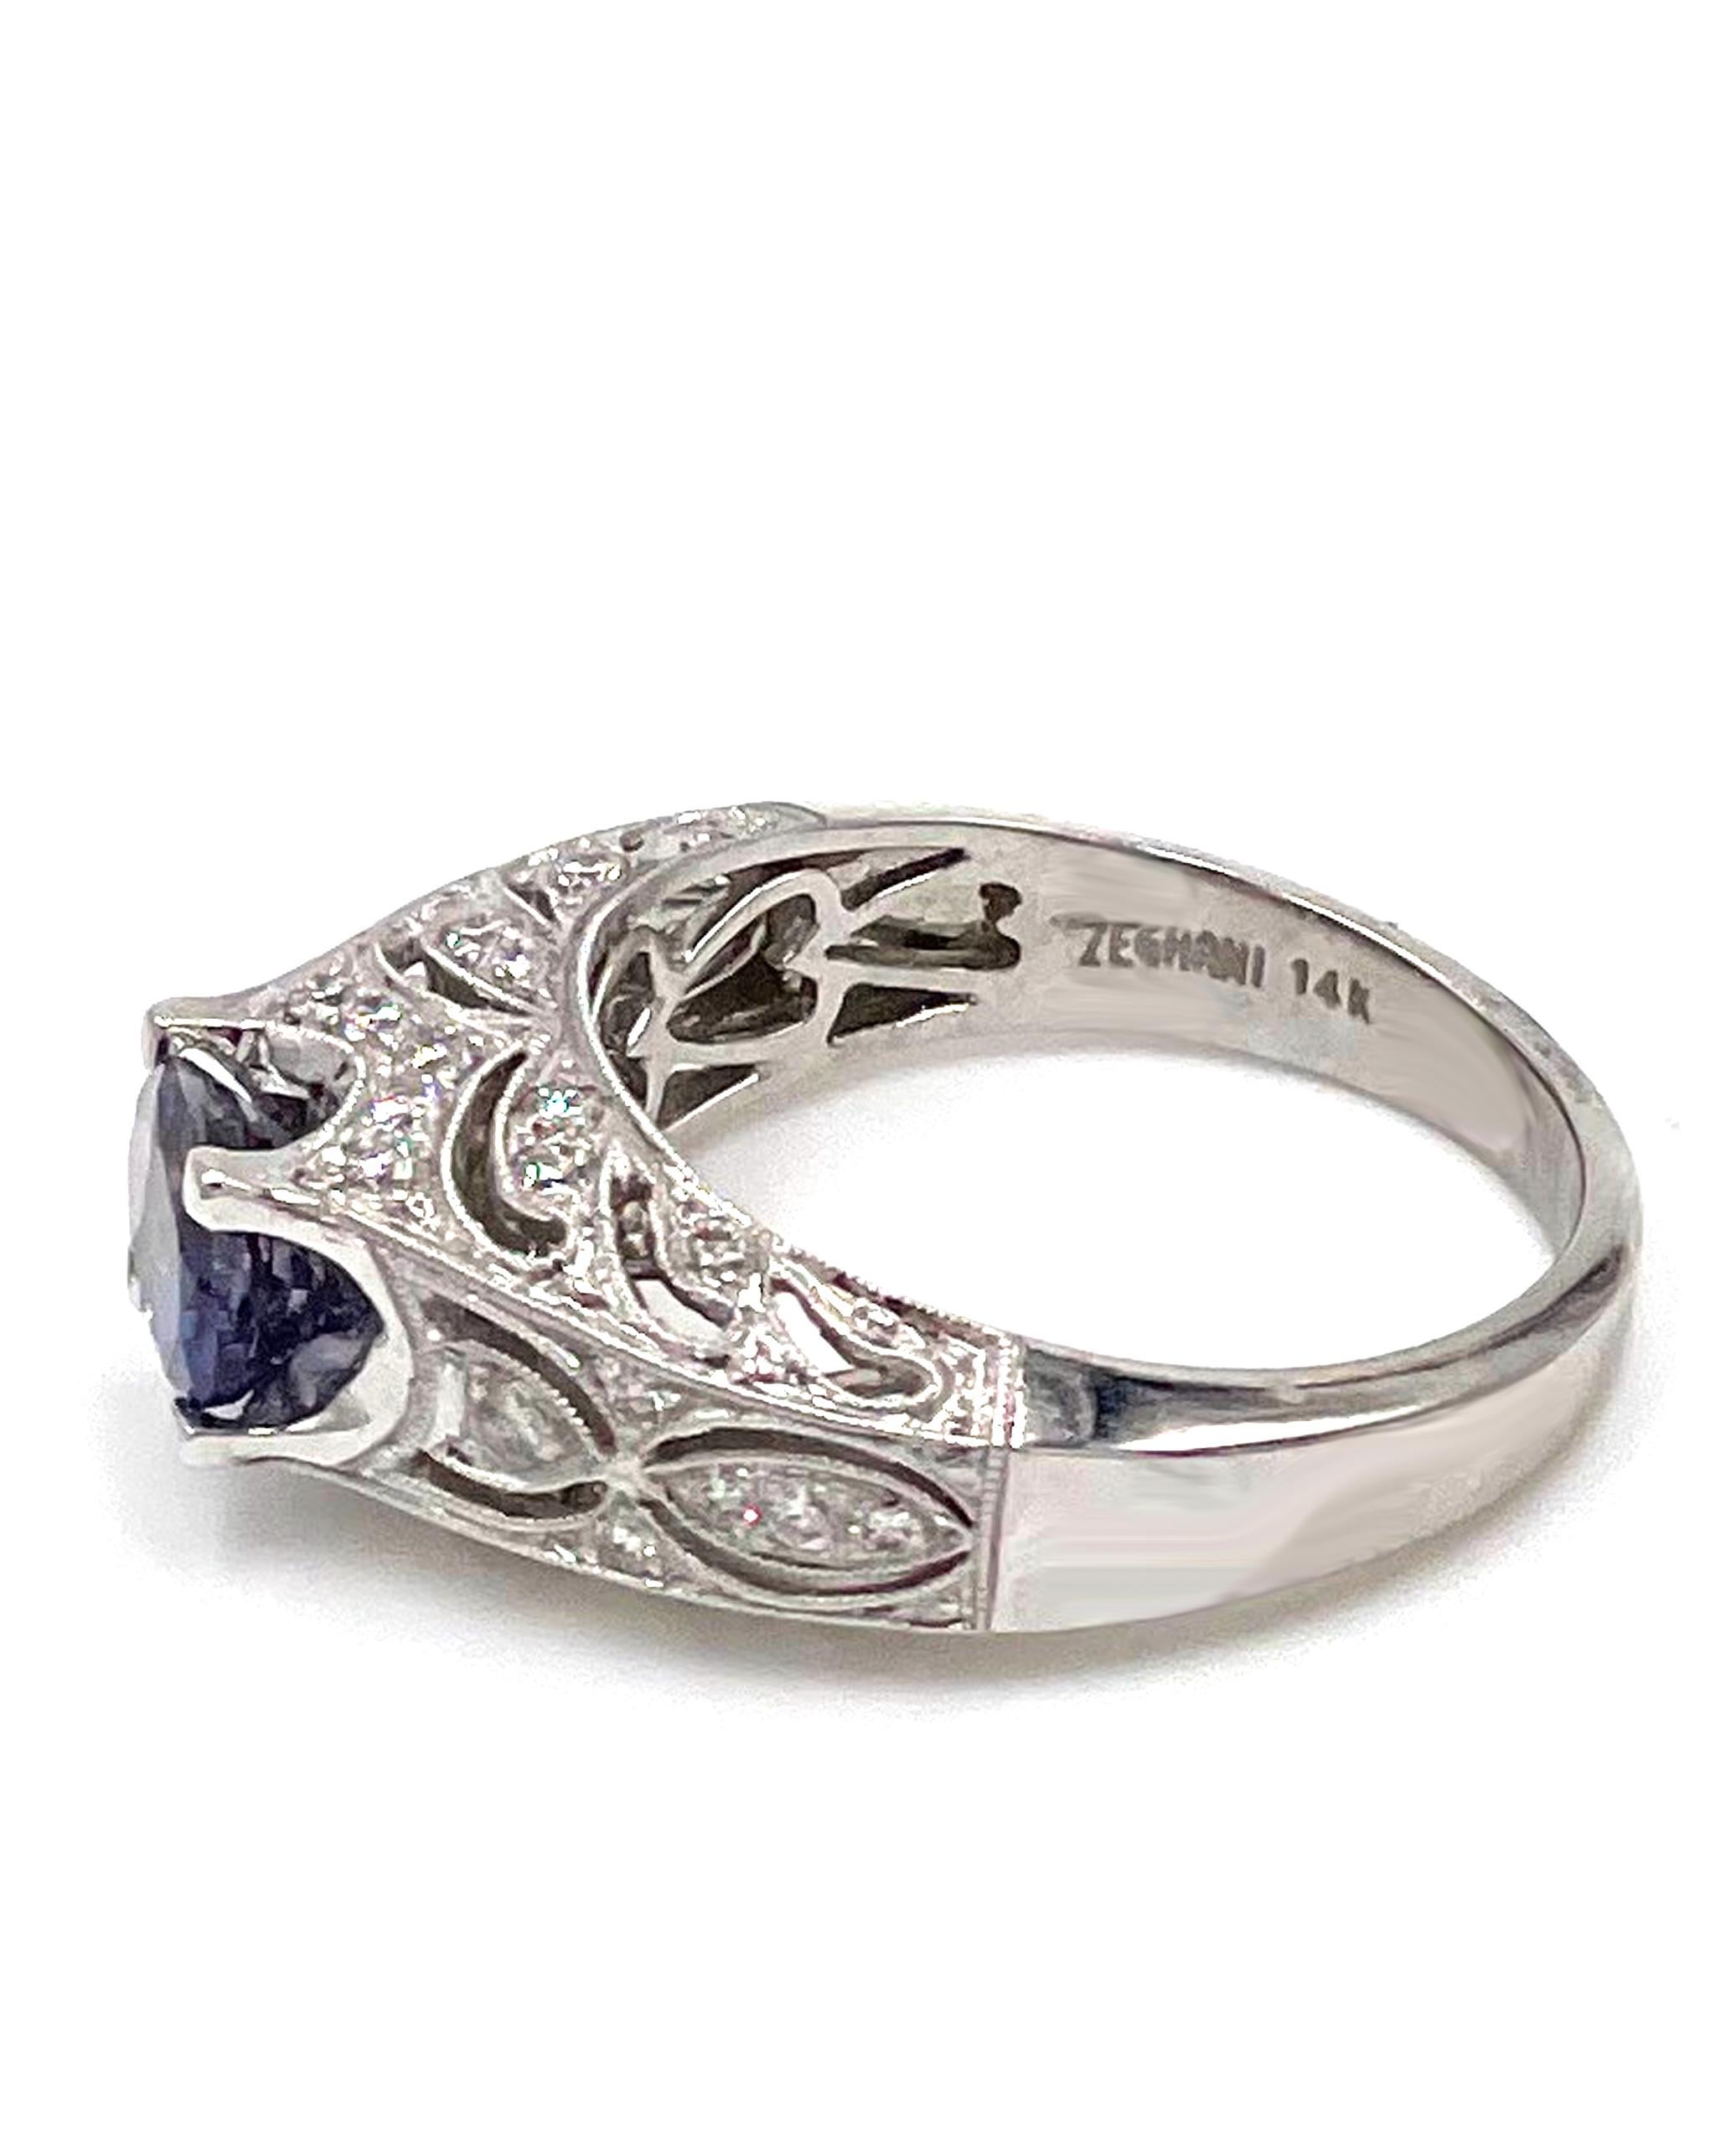 Contemporary Zeghani ZR201 Ring with Diamonds and Iolite For Sale